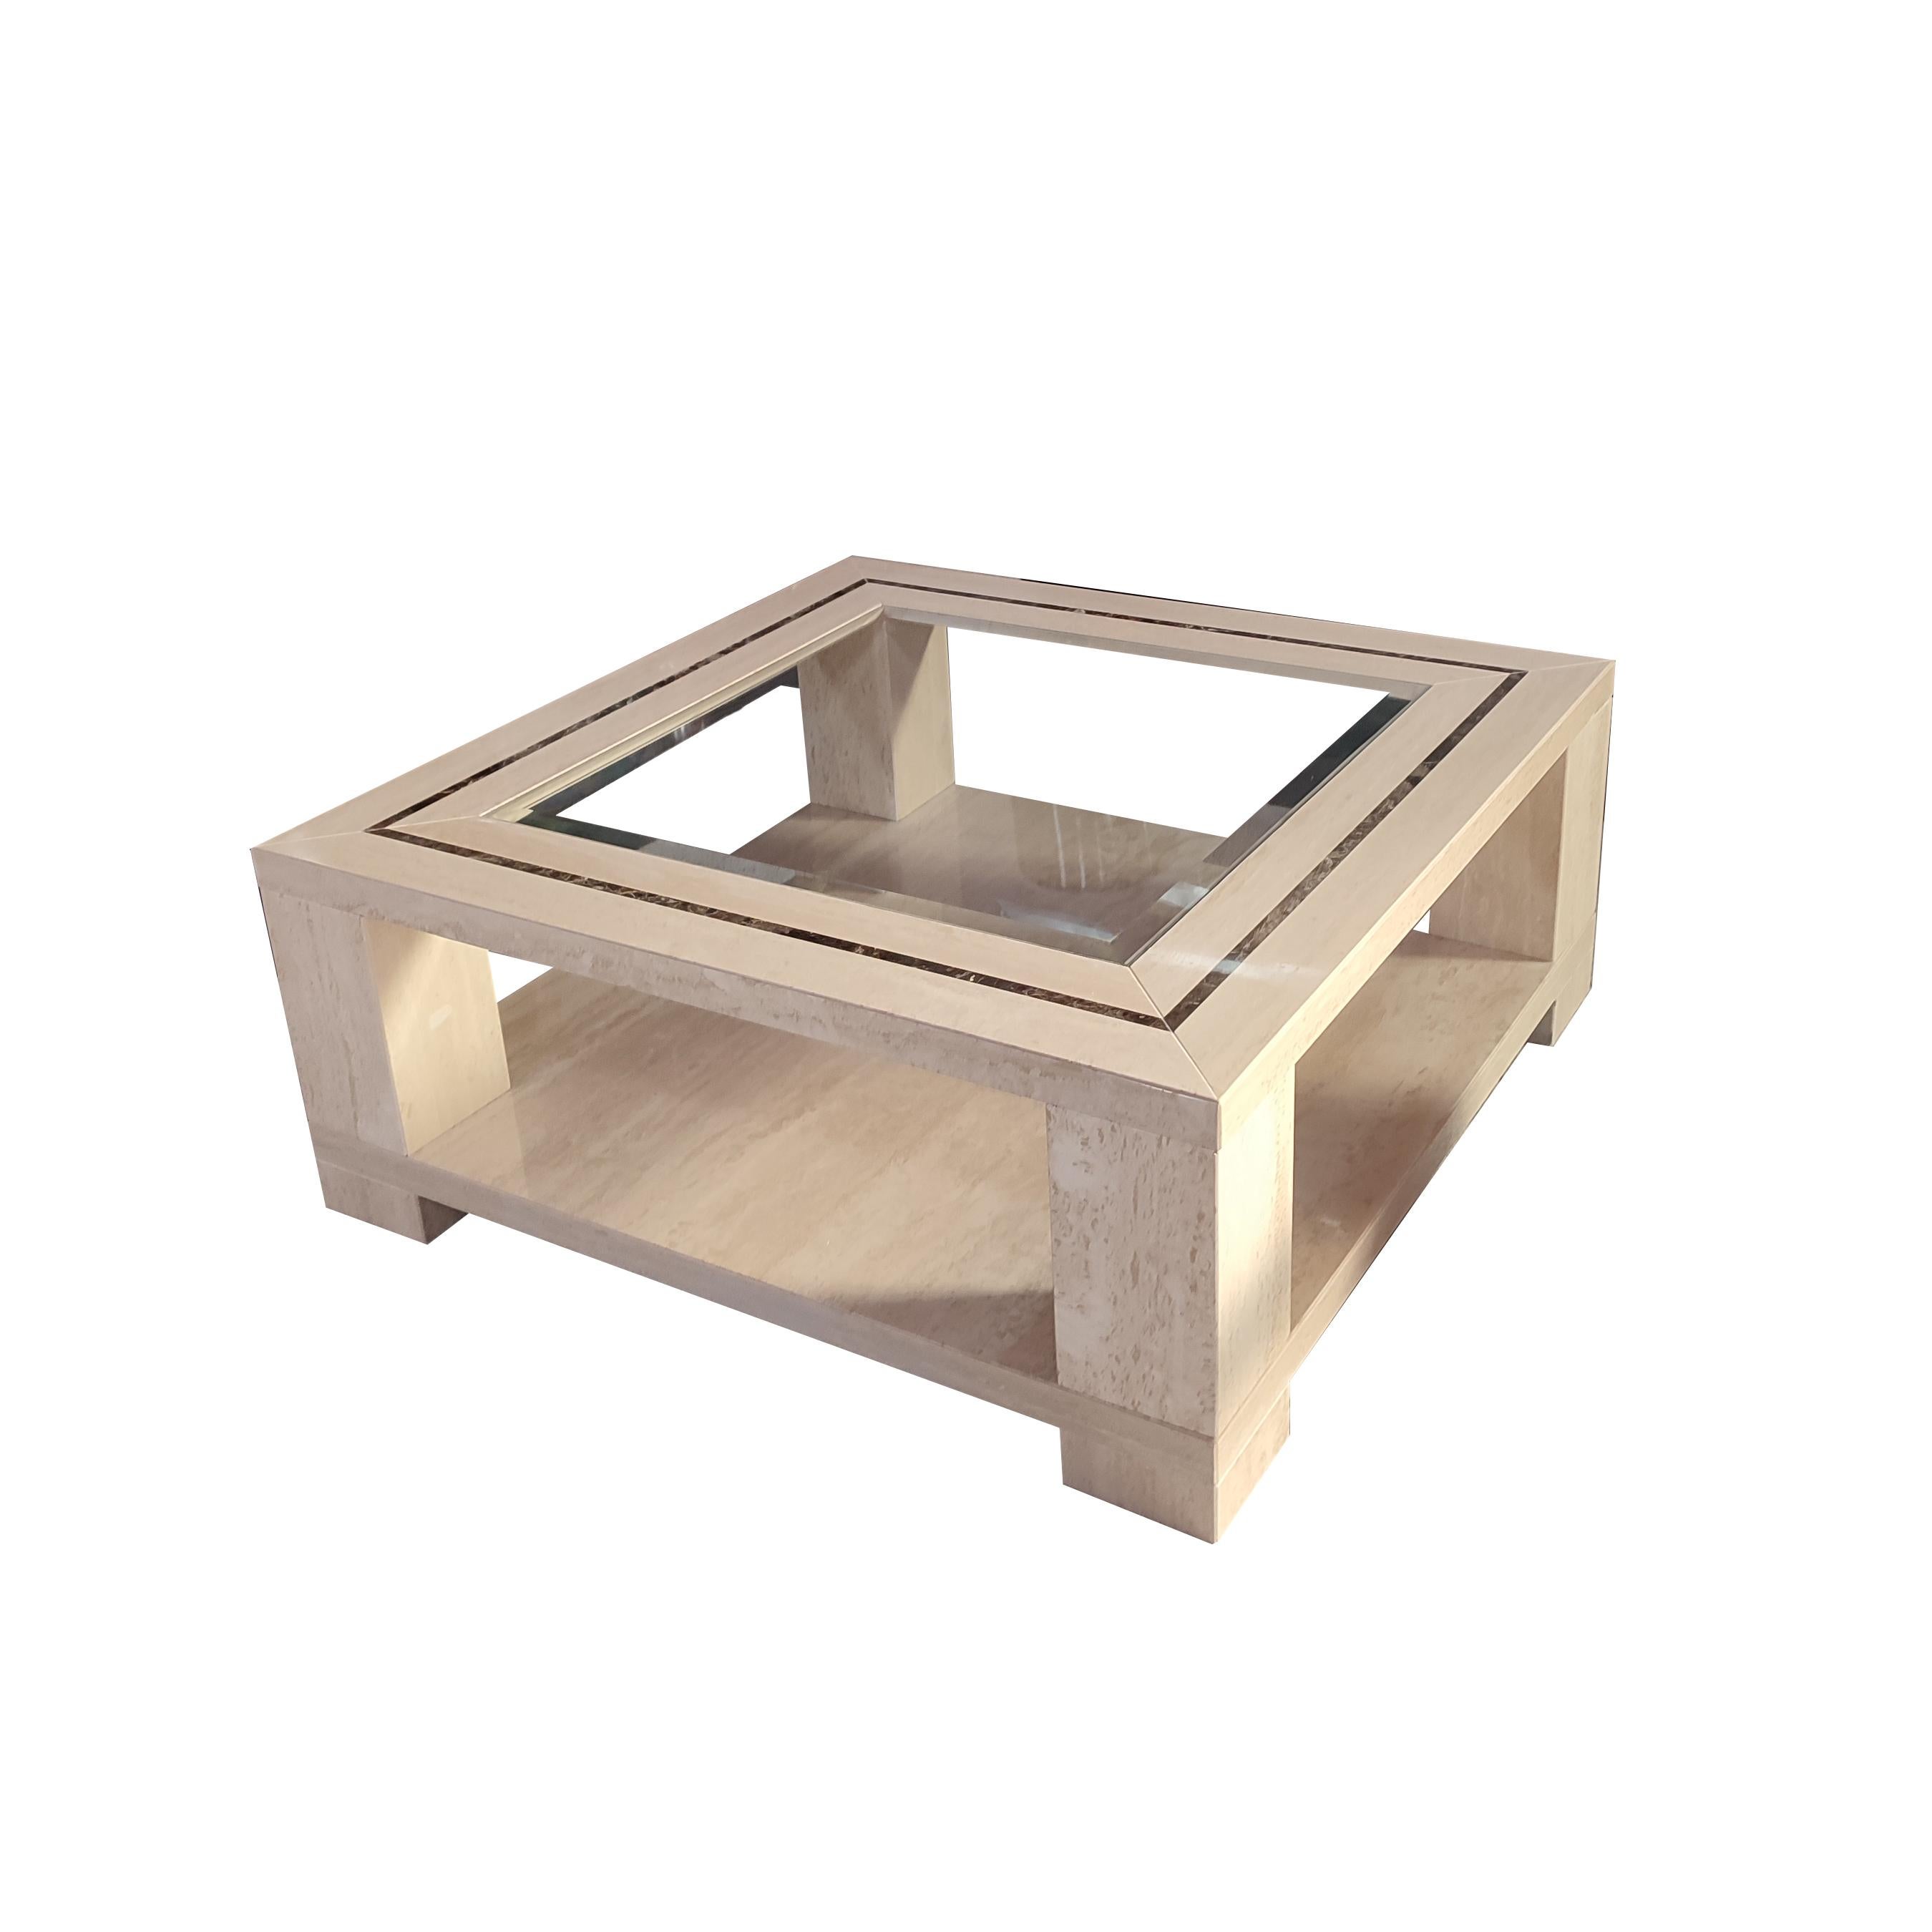 Aroa Marble Travertine Design Table Midcentury Original Marble Marquetry & Brown
The Aroa coffee table is an original piece from the 80's, manufactured by Creaciones Moll in Segovia, Spain. The Aroa table consists of a lower magazine rack in